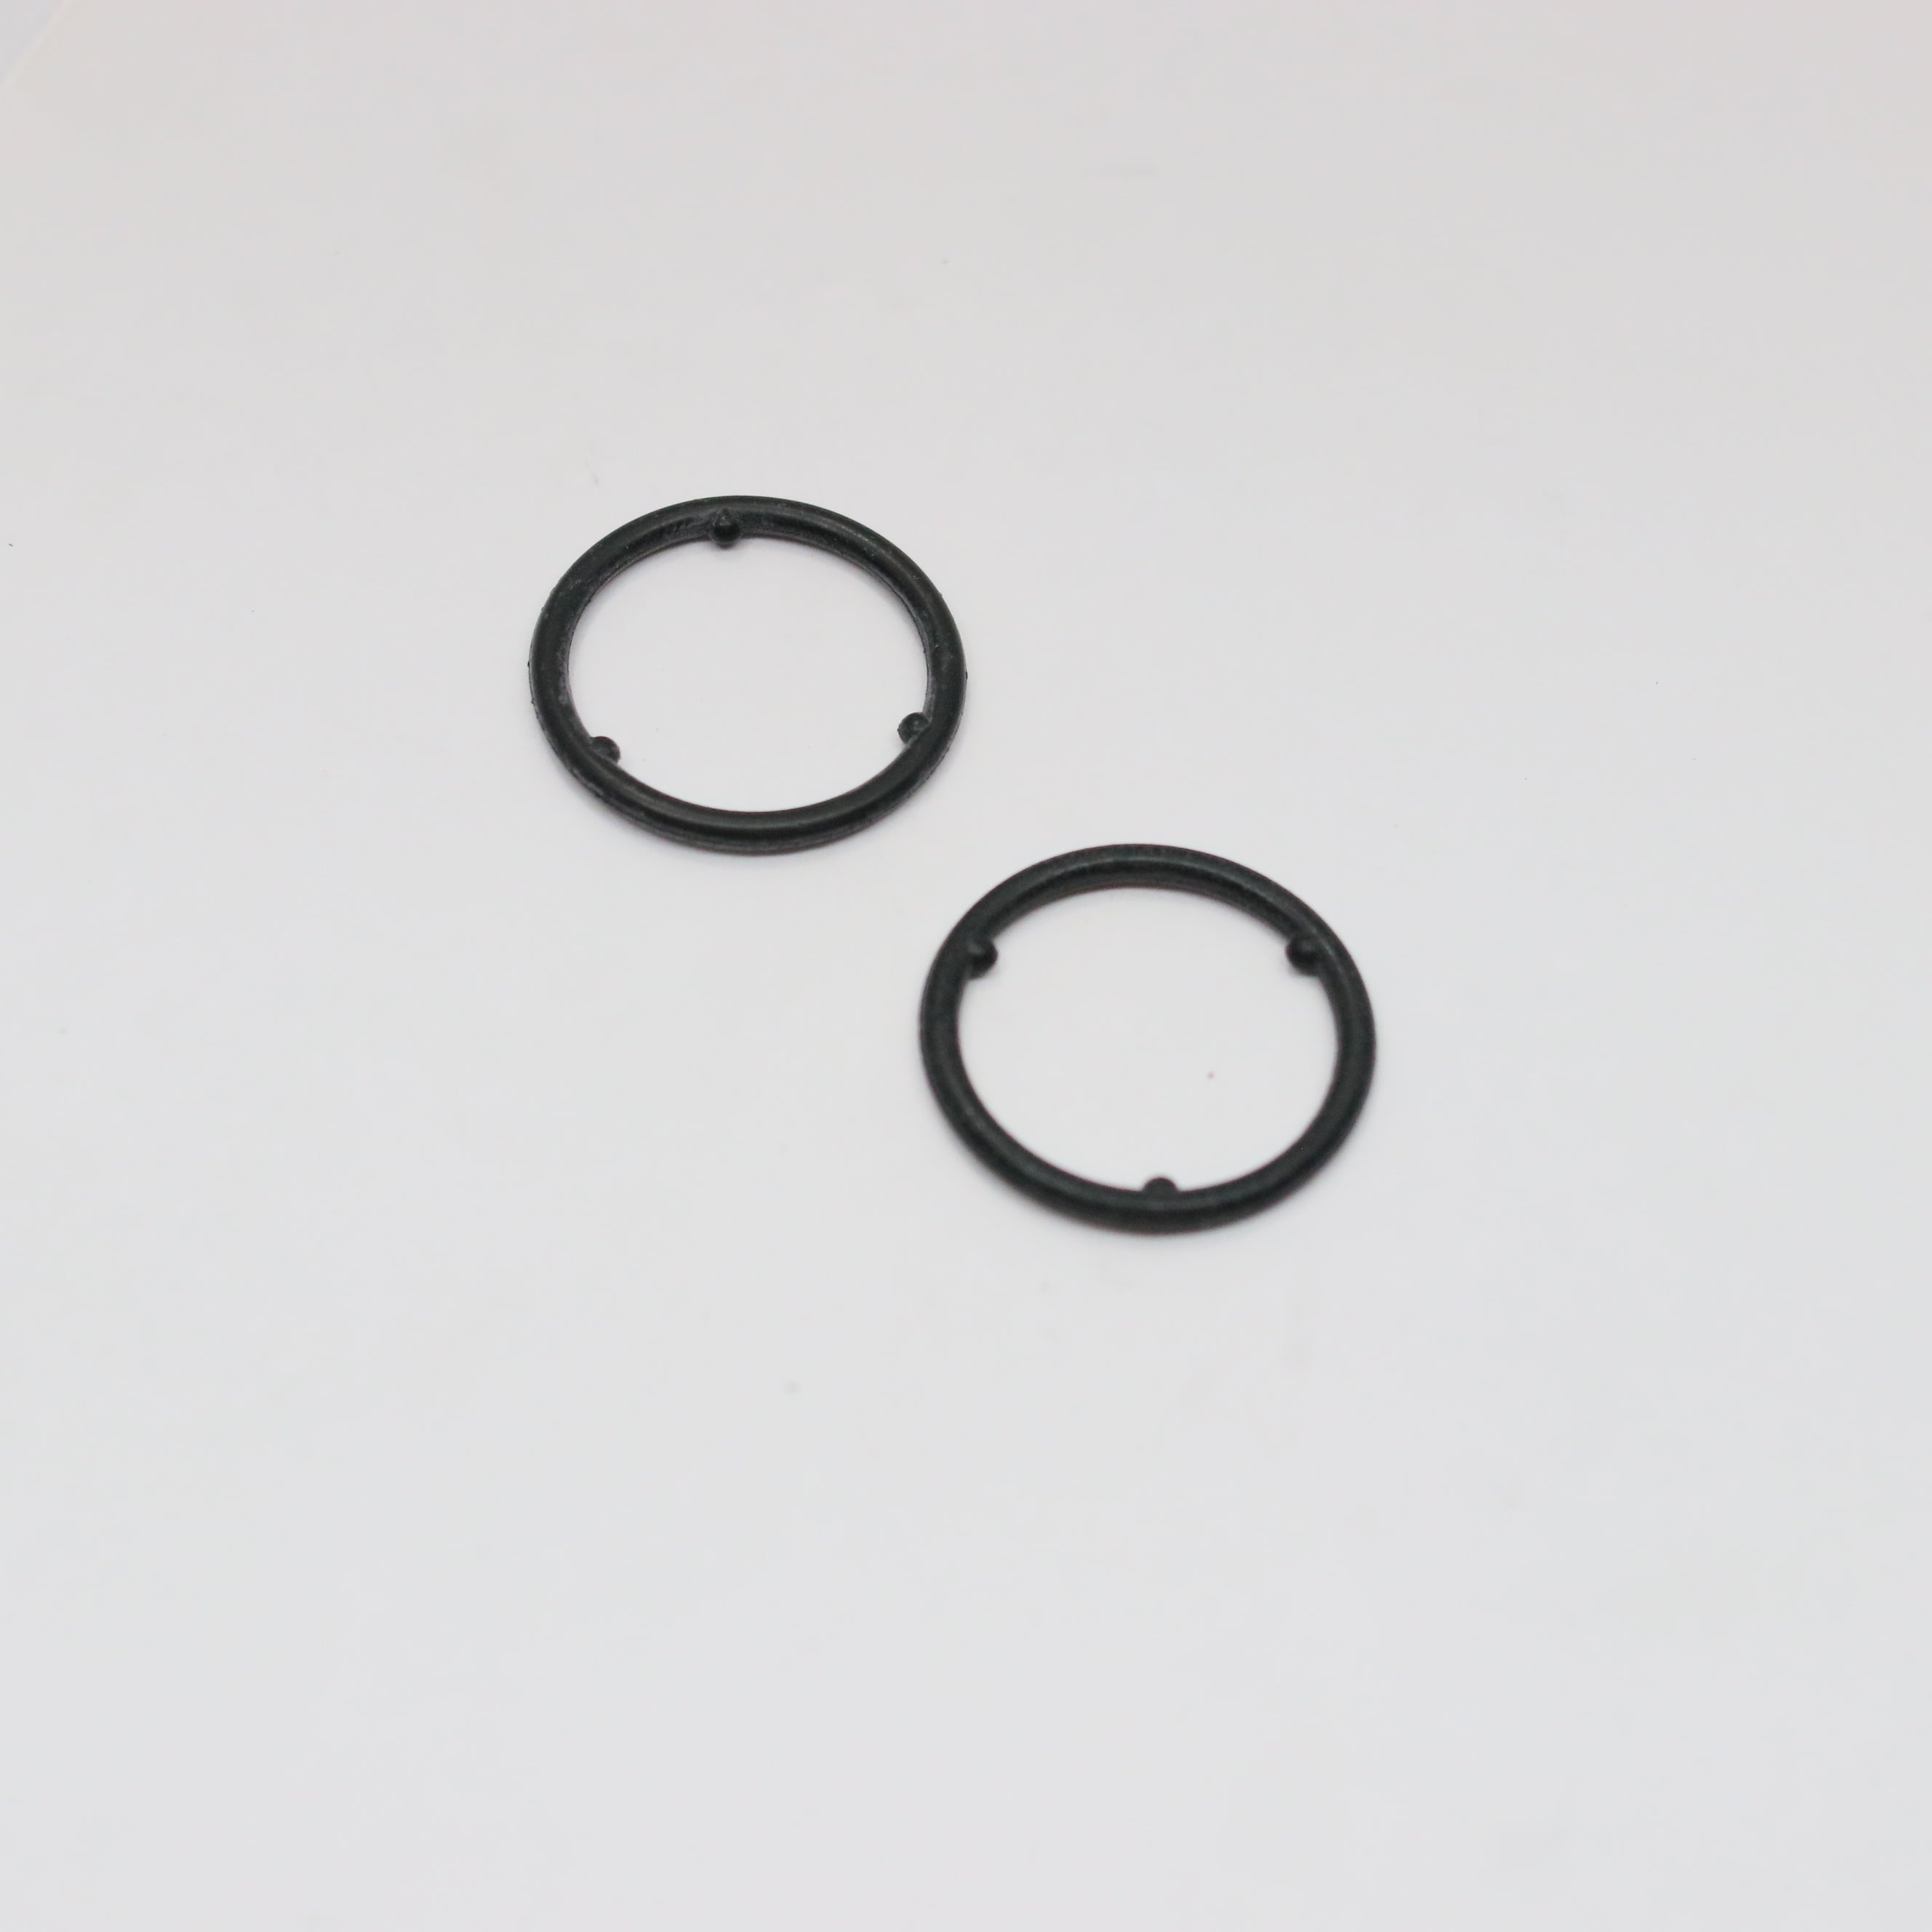 Buy 6 ea. Cover O-Ring FITS The BROASTER Model 1800 (ONLY F.D.A. Grade O- Rings, NOT Foam